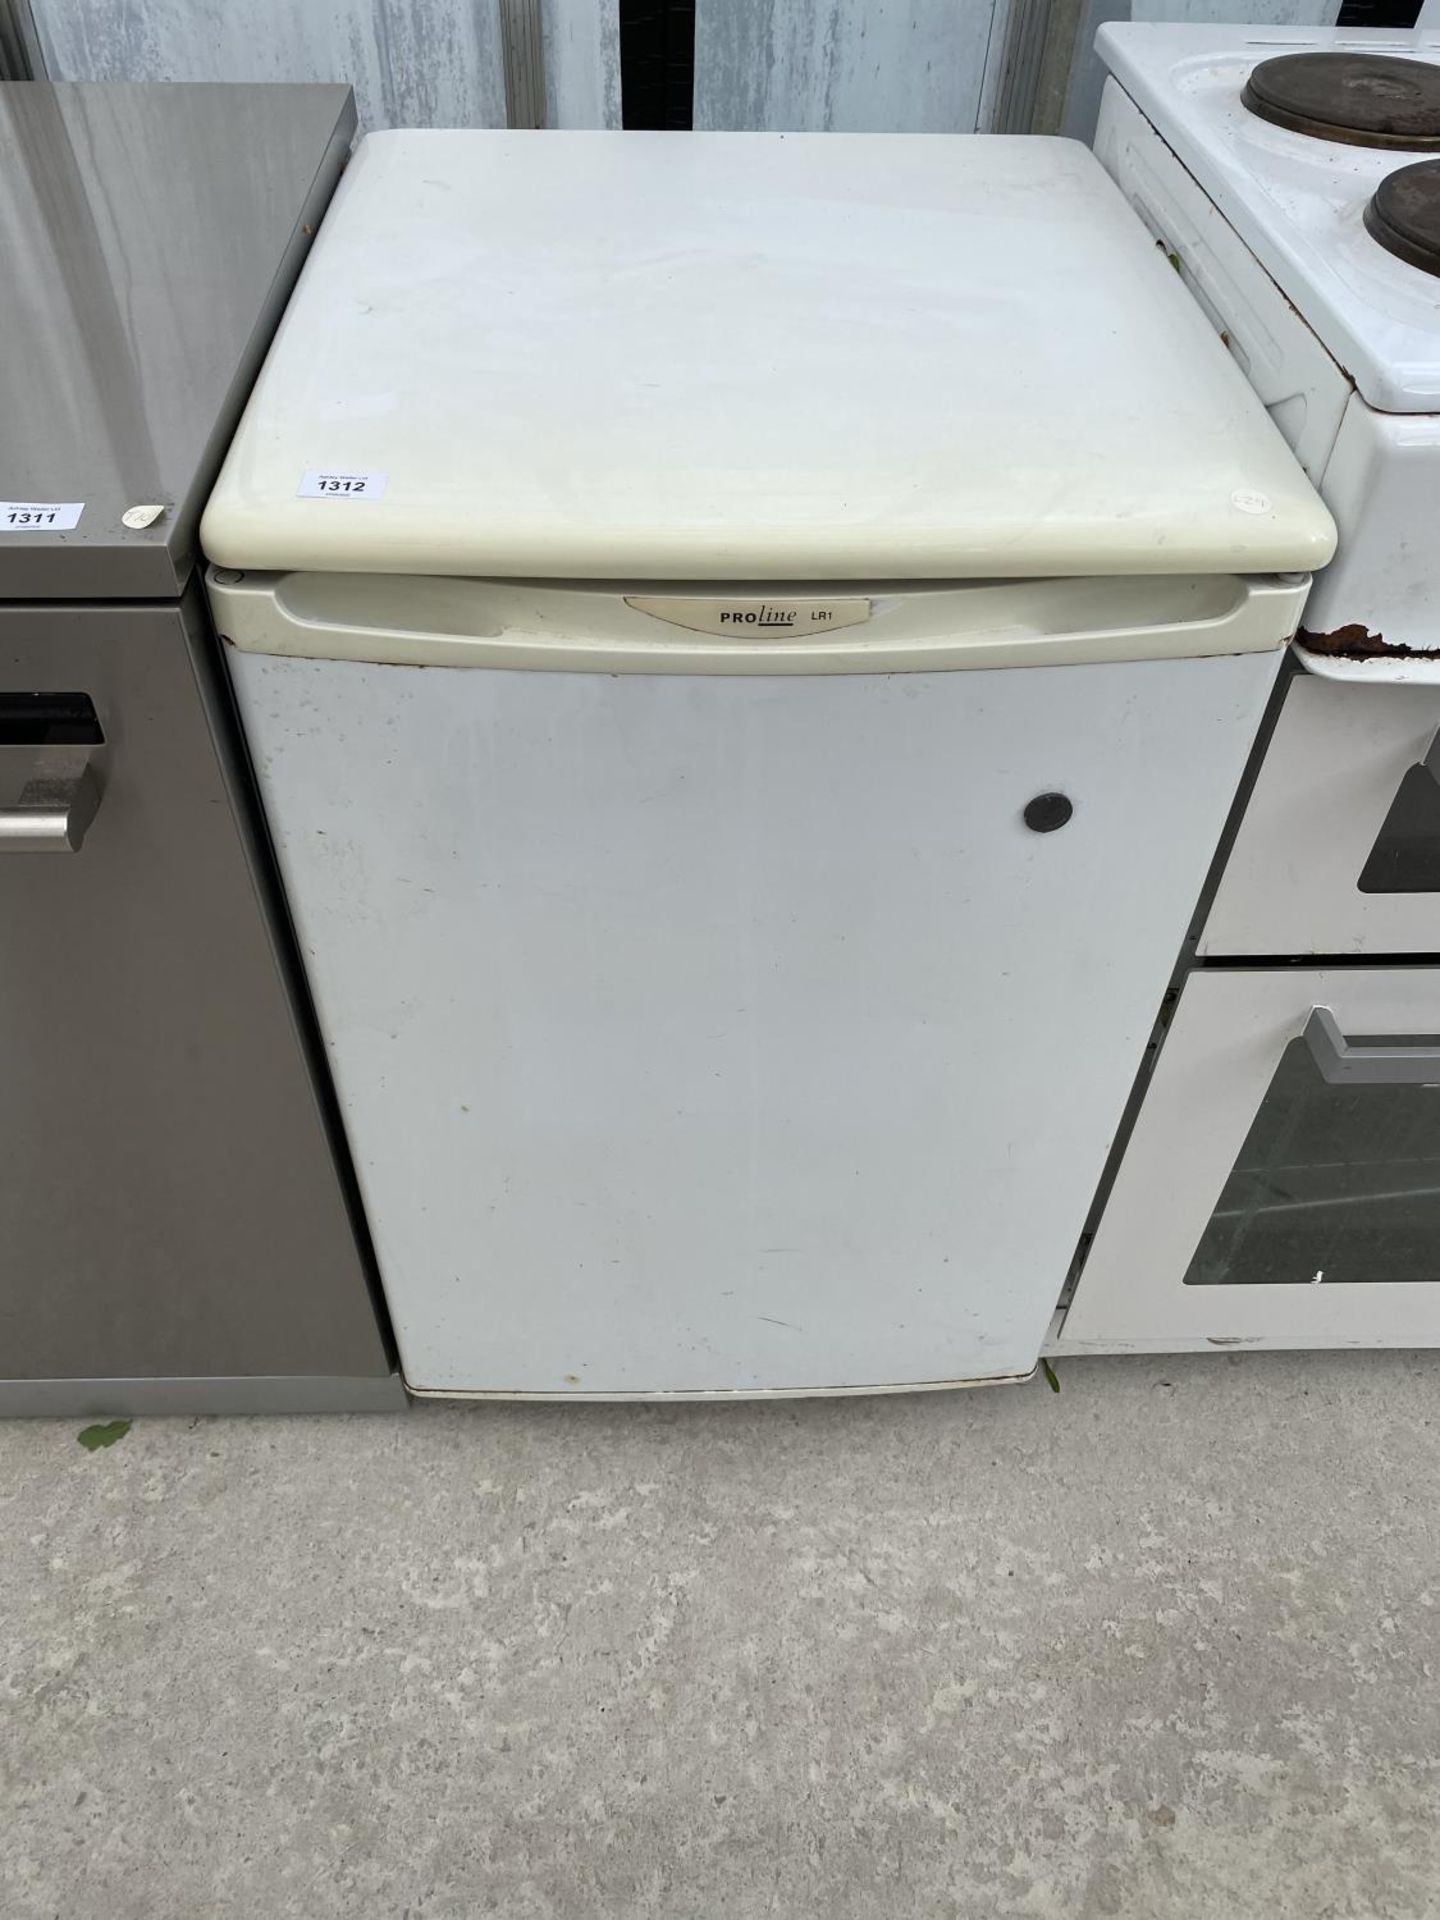 A PROLINE FRIDGE IN NEED OF CLEAN IN WORKING ORDER